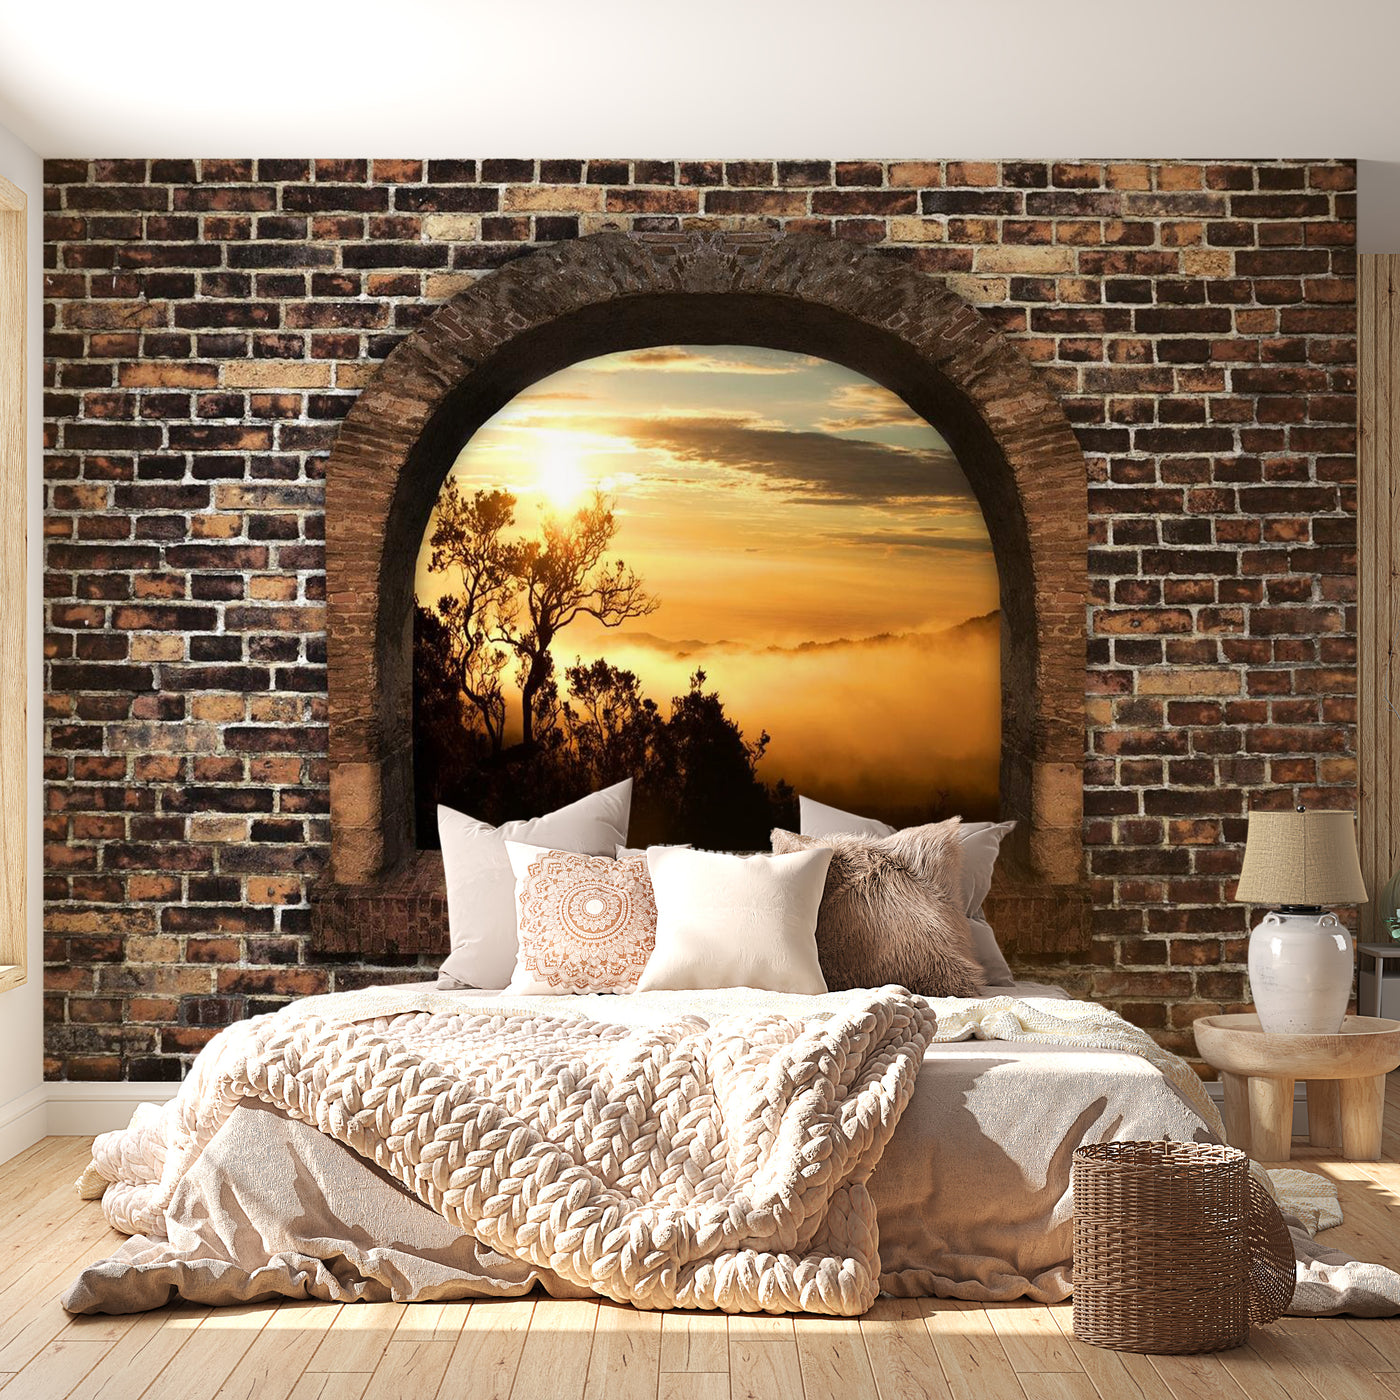 Peel & Stick Nature Wall Mural - Stony Window: Morning Mist - Removable Wall Decals